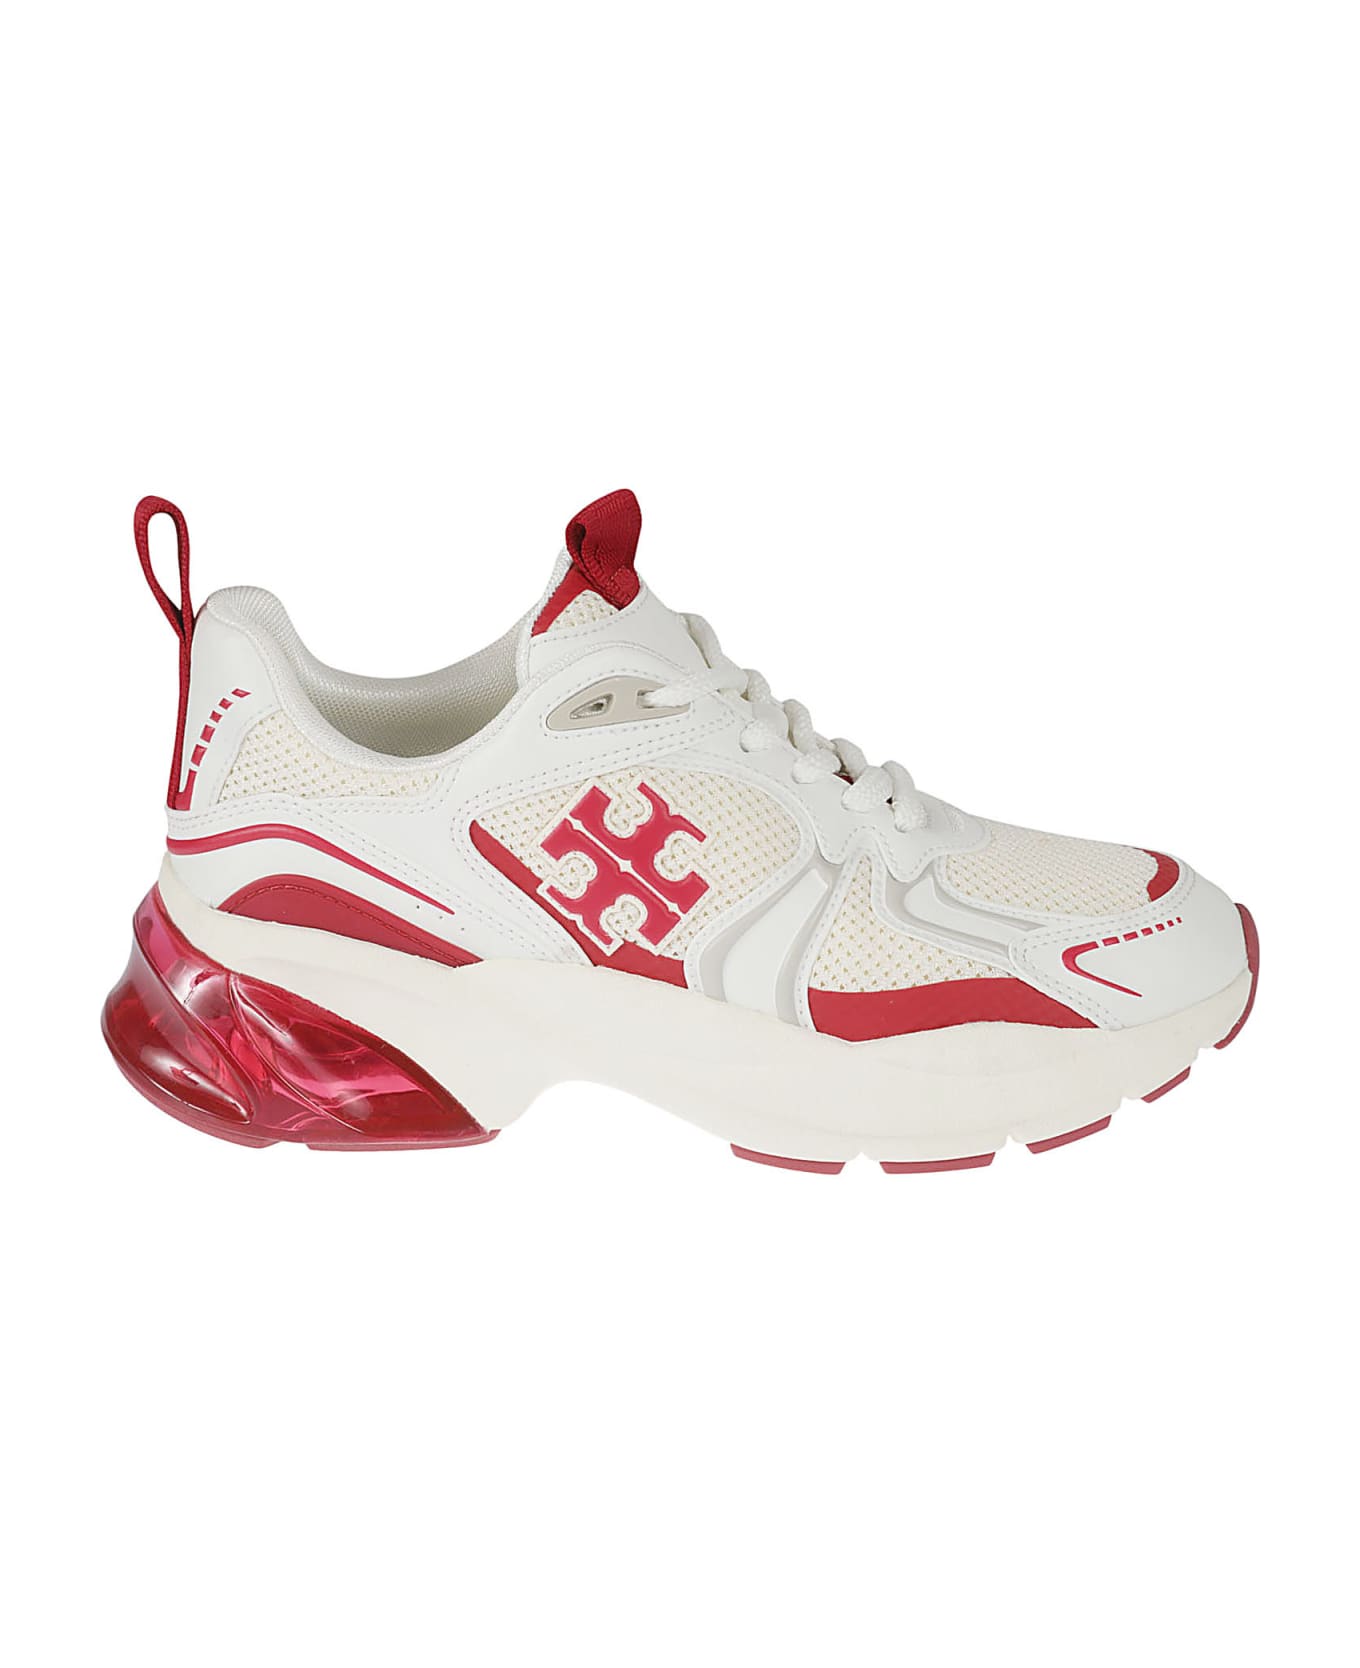 Tory Burch Good Luck Tech Sneakers - New Cream/Tory Red